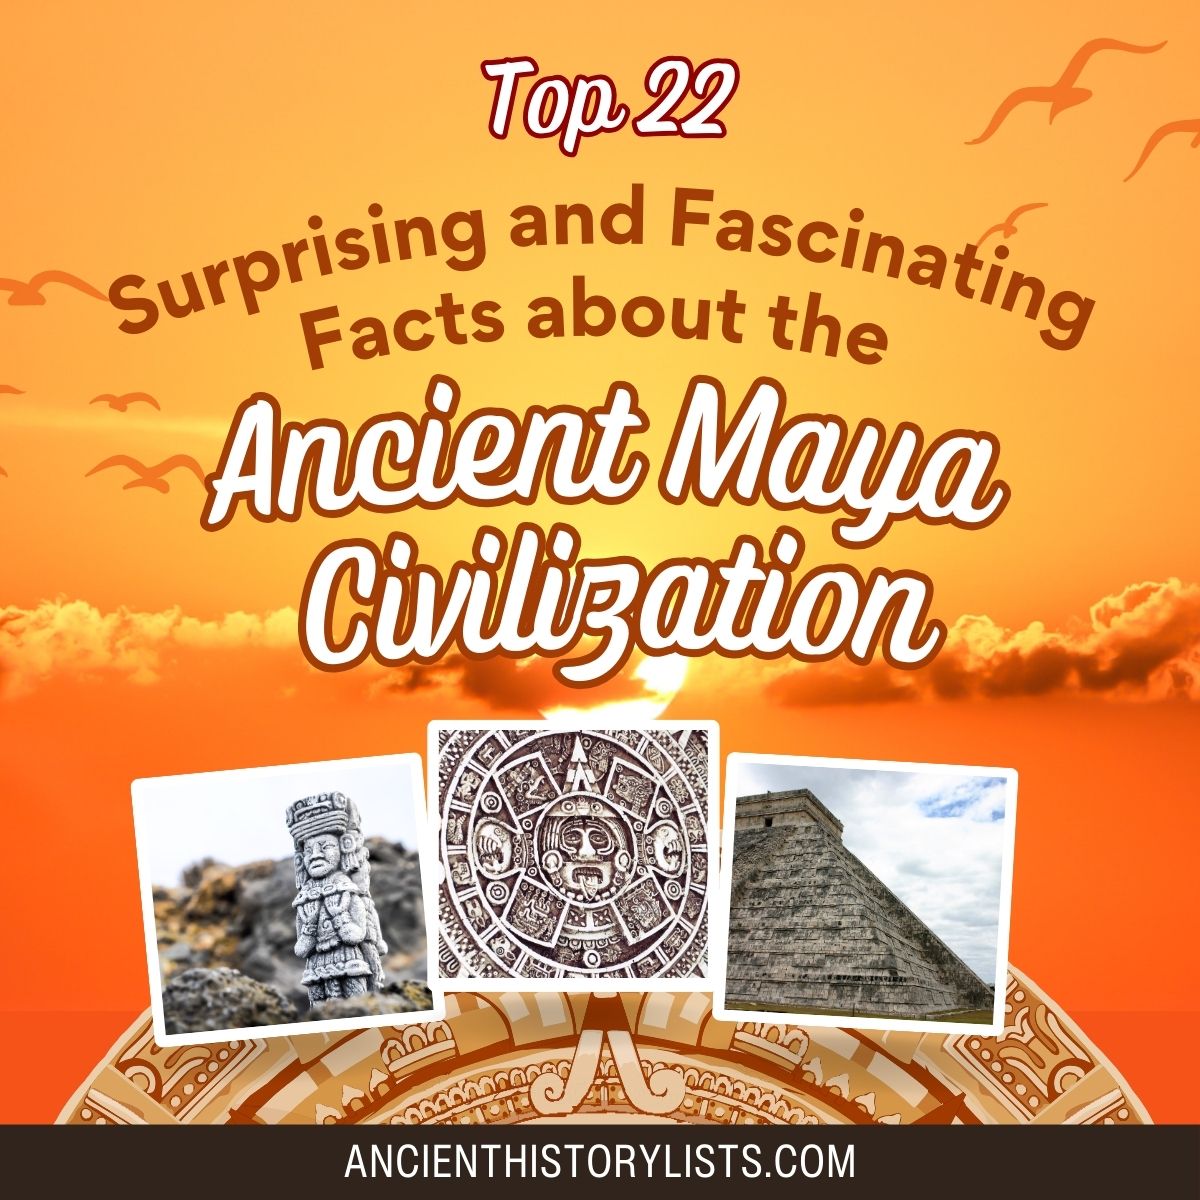 Fascinating Facts about the Ancient Maya Civilization